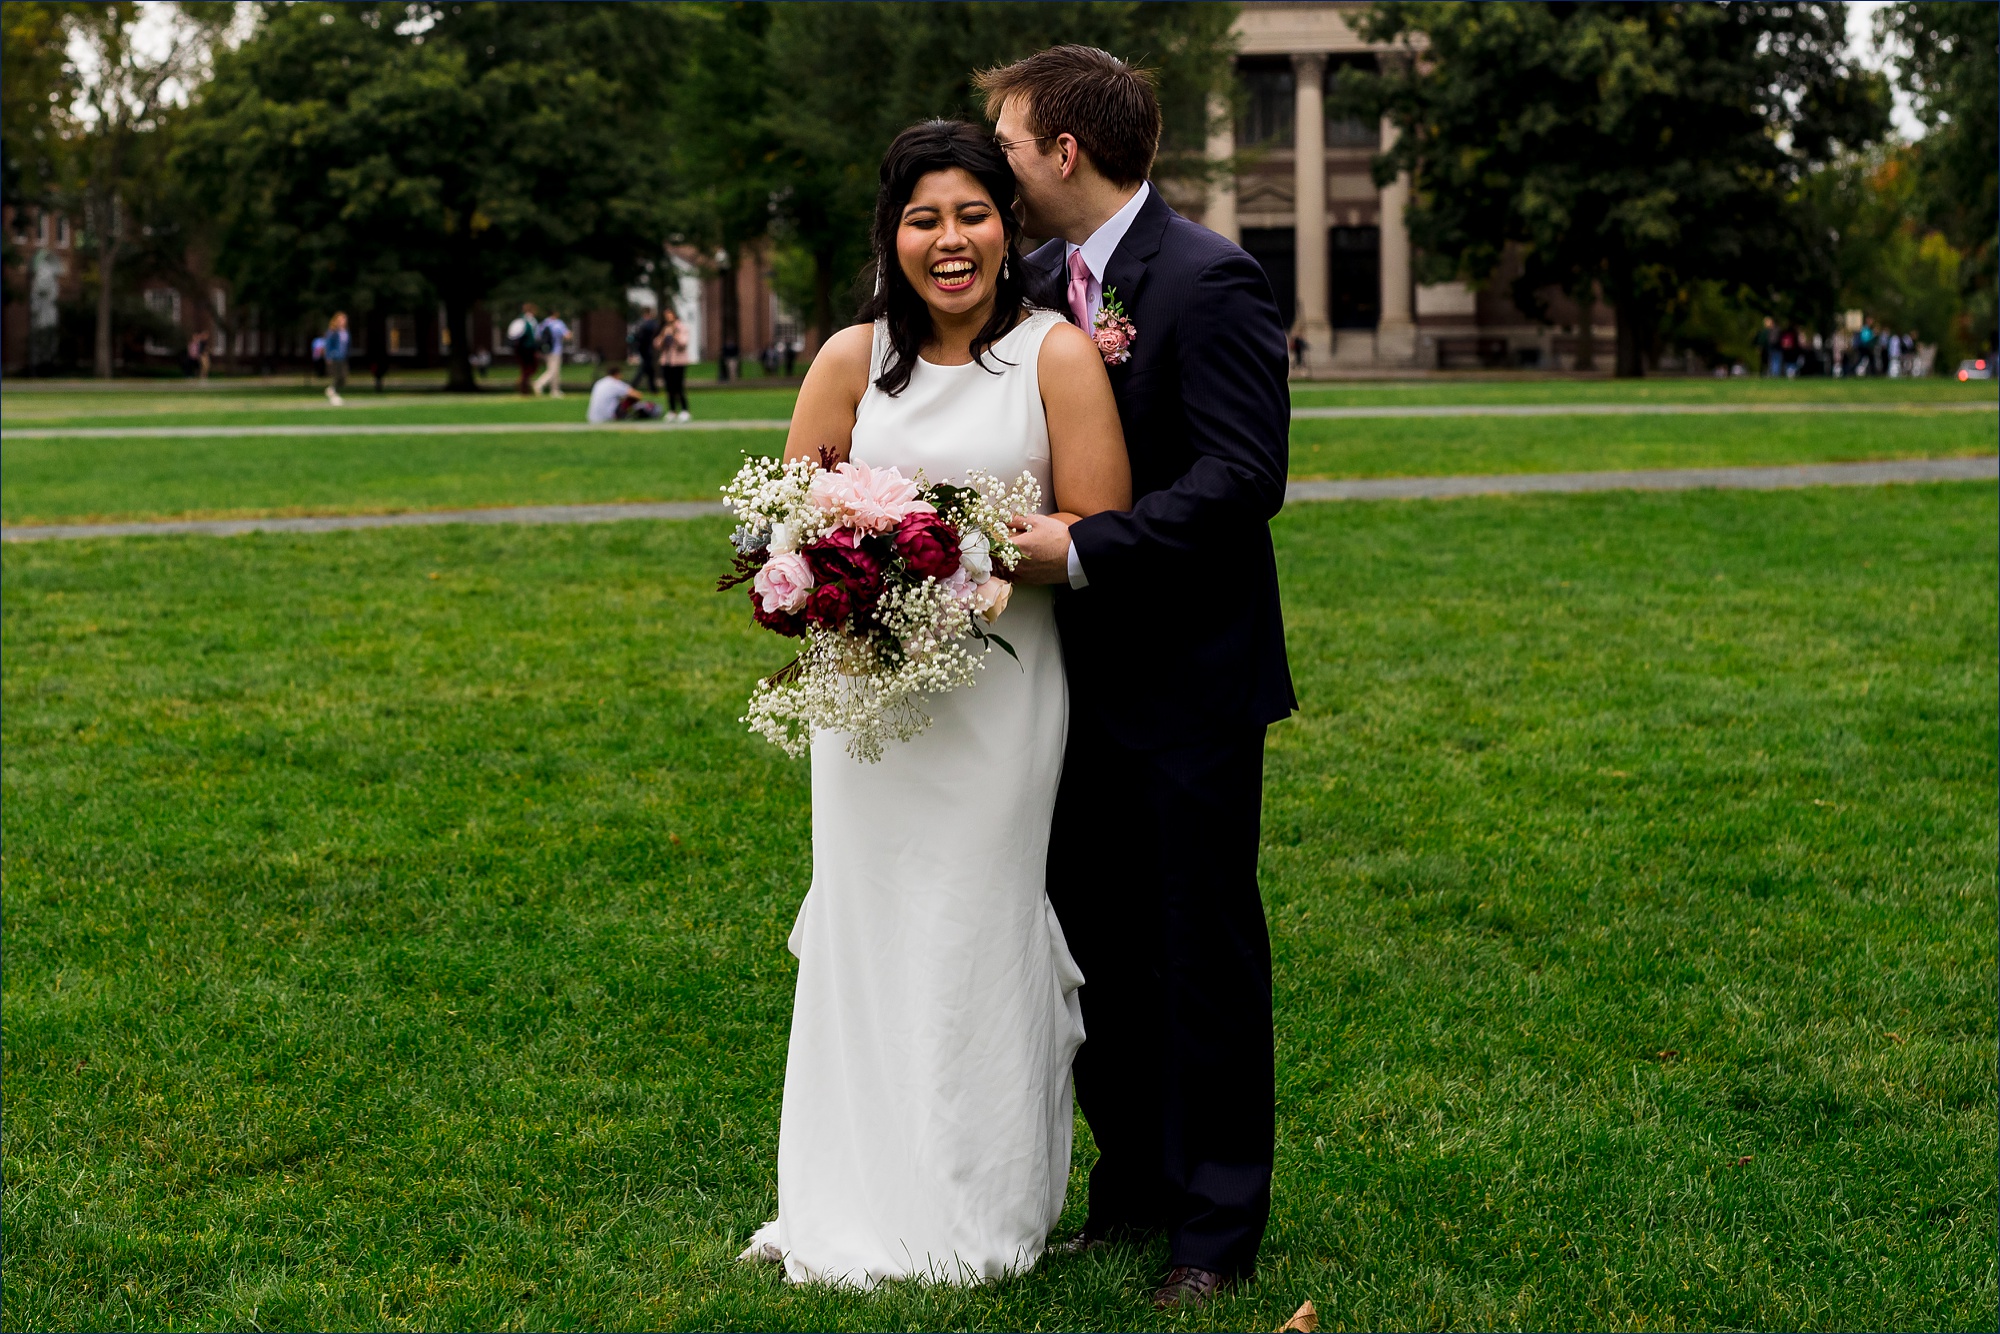 The couple share a laugh together on The Green in Dartmouth after their fall wedding